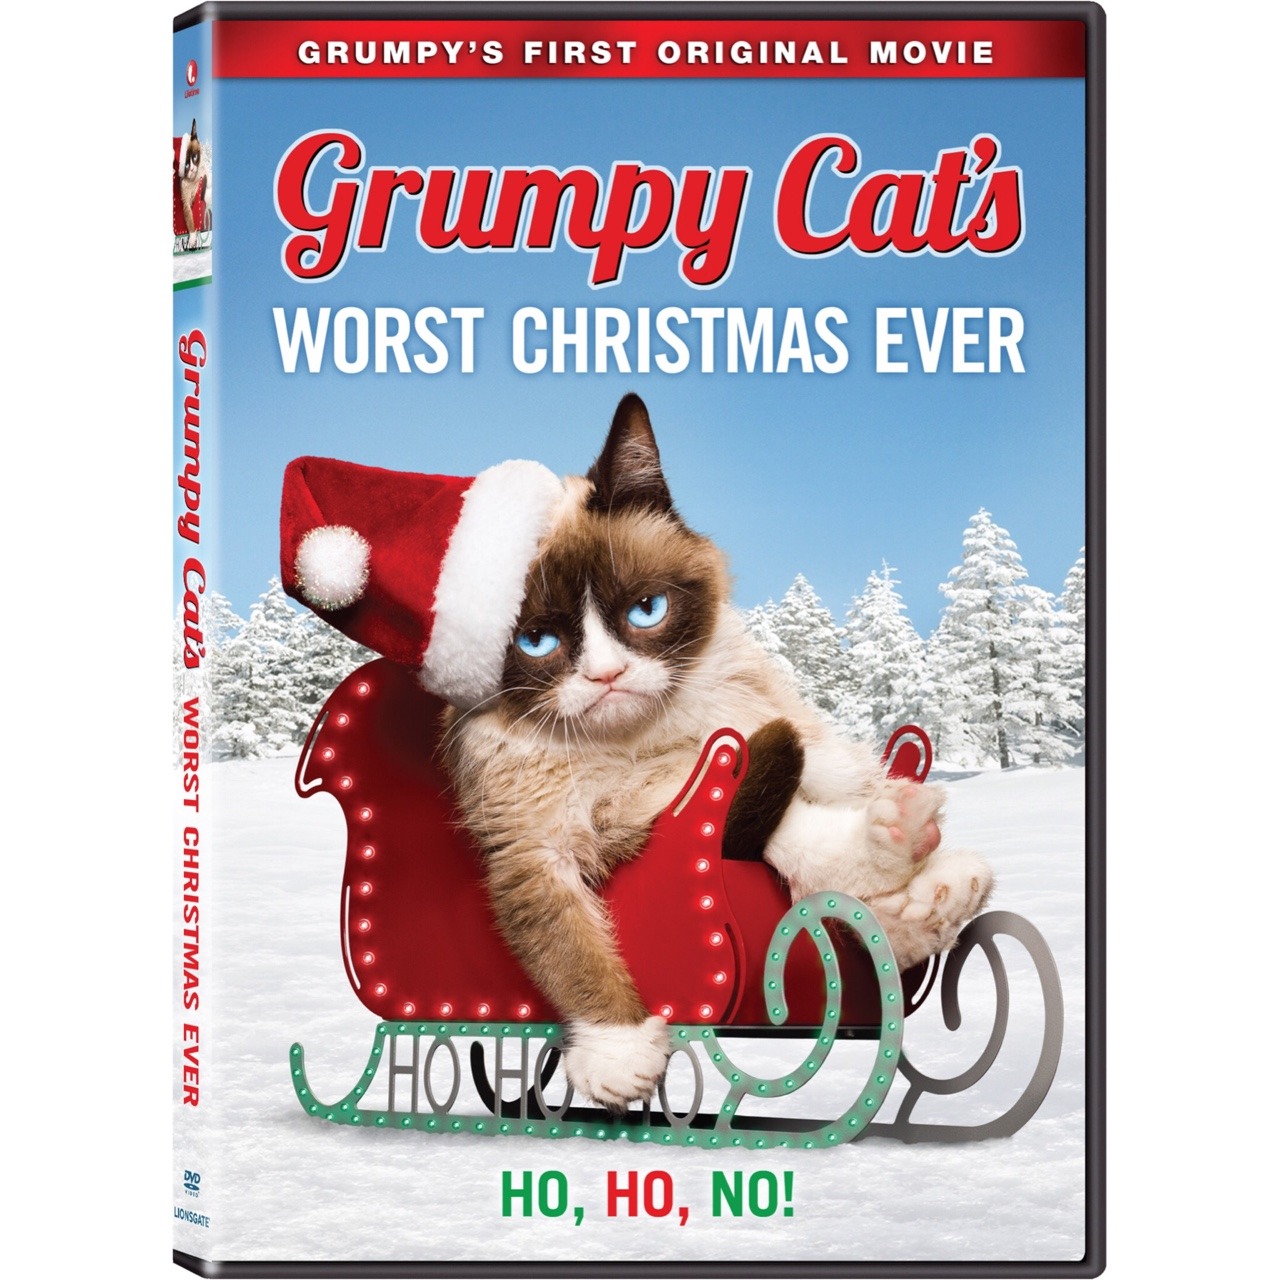 HO HO NO! Grumpy Cat’s Worst Christmas Ever is now available to pre-order on DVD. Don’t forget to catch it at 8pm, Nov 29th on...